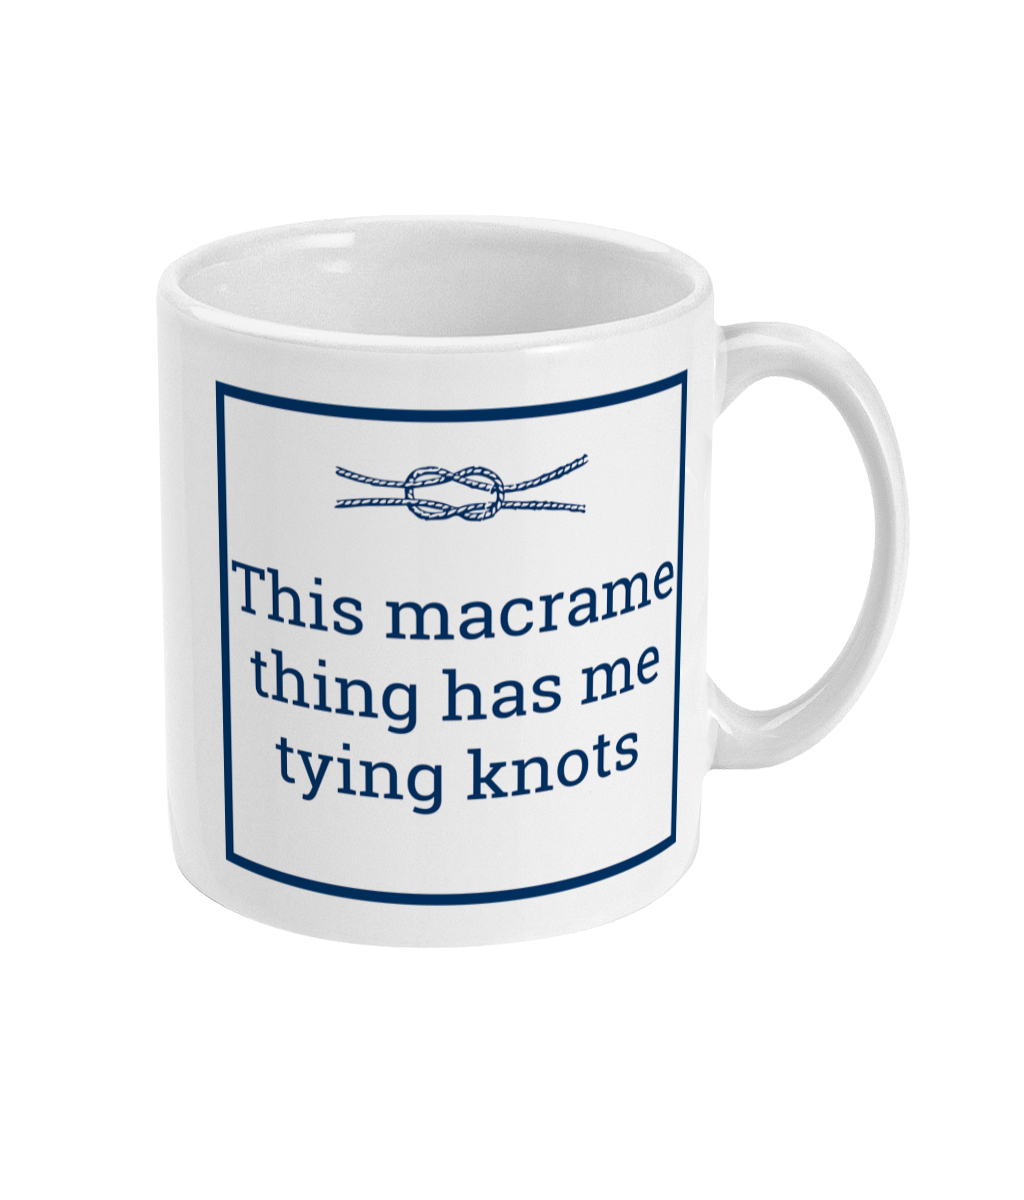 a mug with an image of a knot plus the text this macrame thing has me tying knots